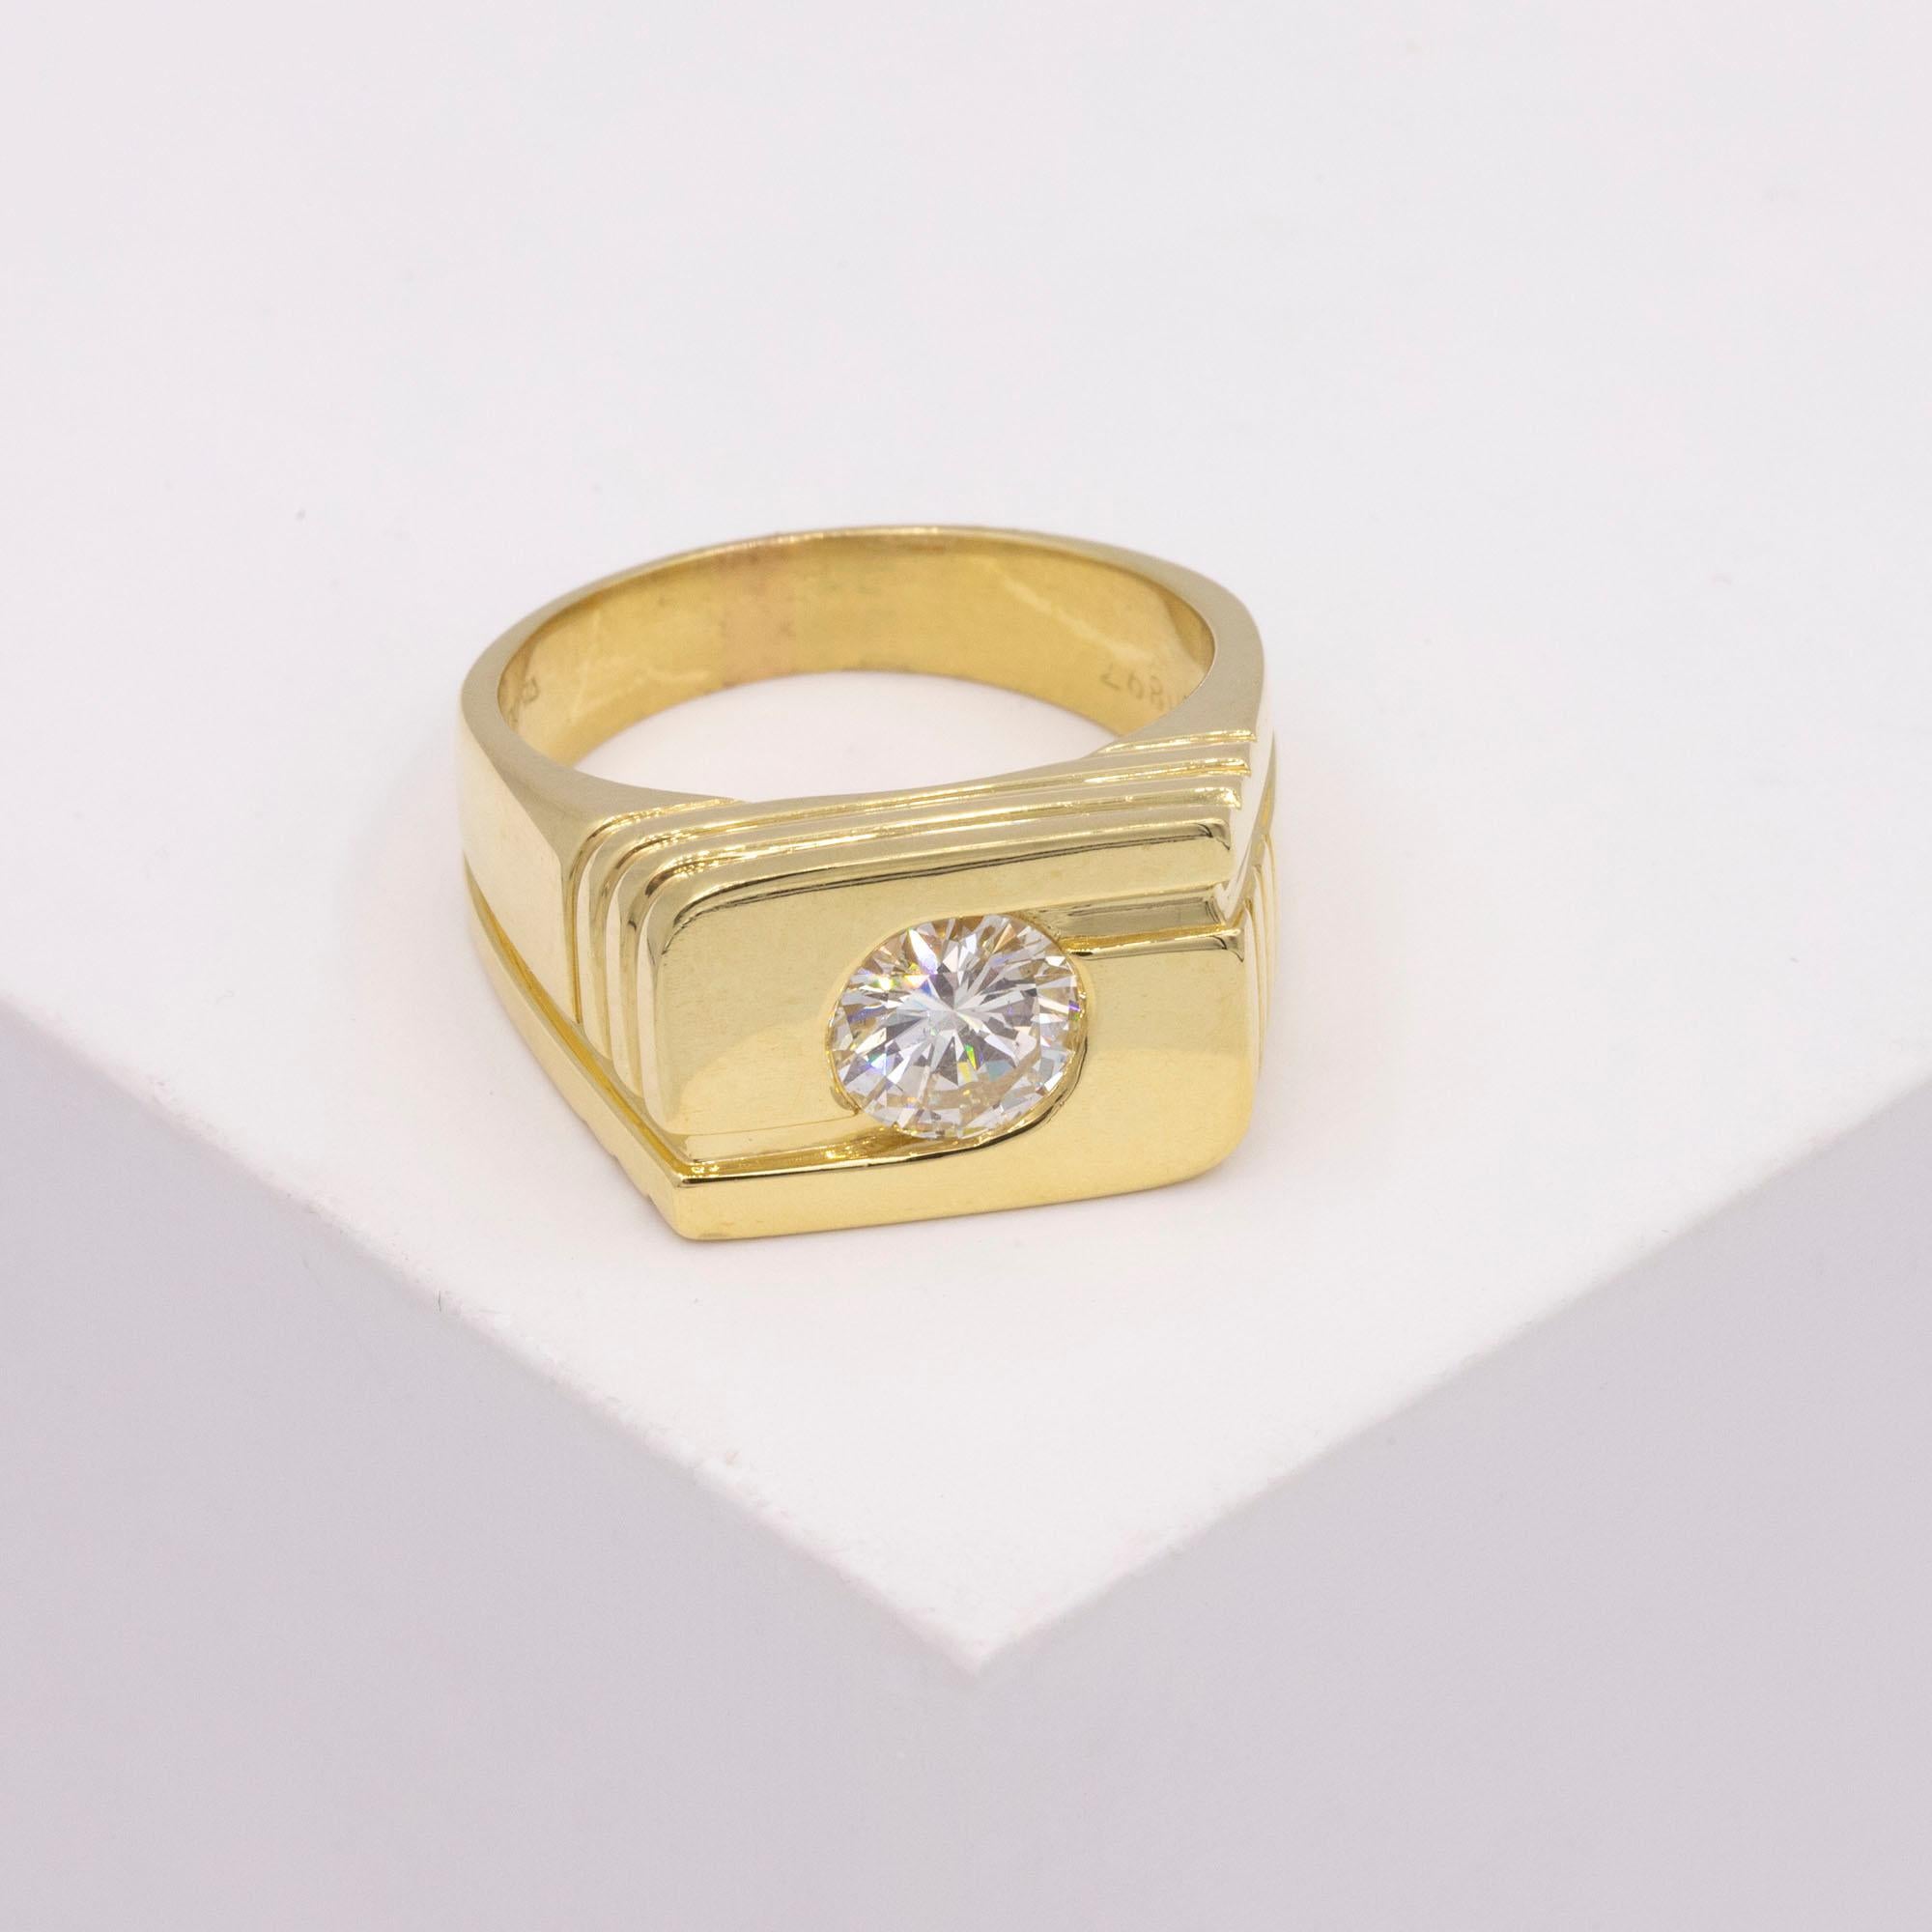 18kt Yellow Gold Diamond ring. Stamped NOVA. The diamond weighs approximately 1.25 carats & is J-K in color & SI1 in clarity. The ring measures 11.80mm at the top with the shank  graduating from 9.20mm to 5mm. The NOVA  insignia is set on the shank.